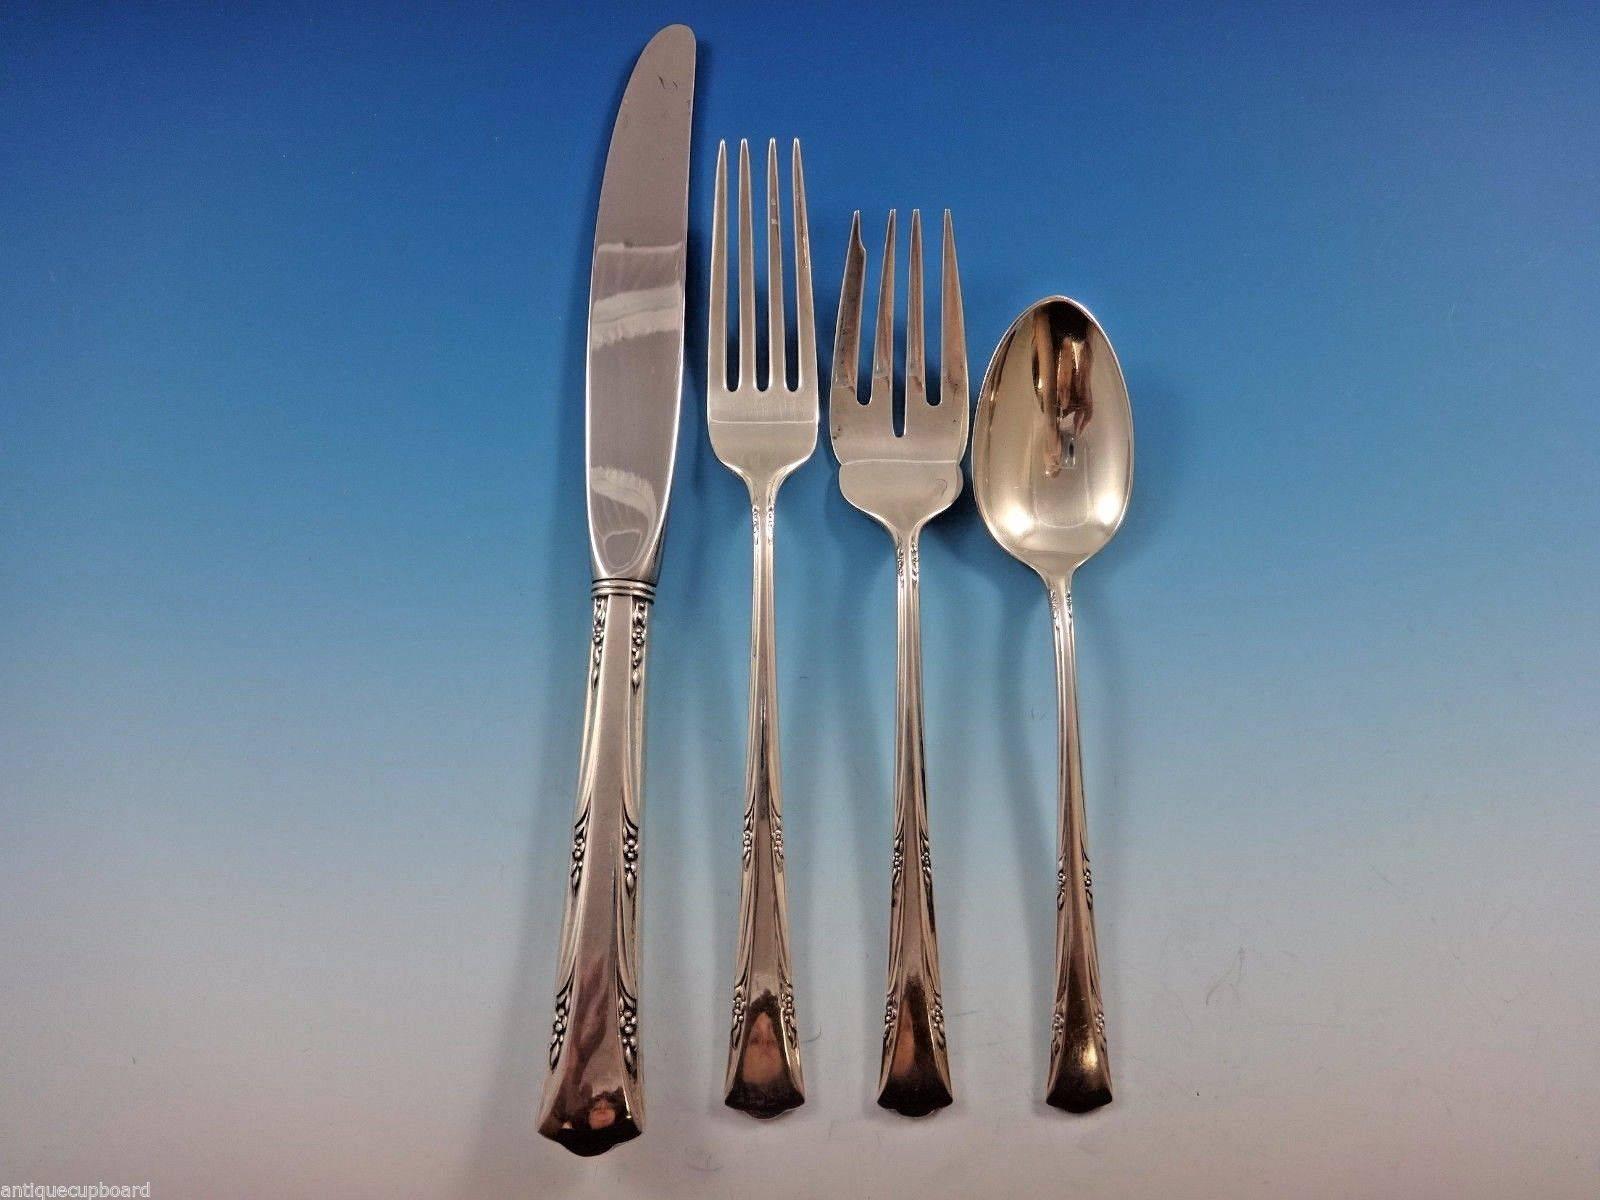 Greenbrier by Gorham sterling silver flatware set - 51 pieces. This set includes: 

12 knives, 9